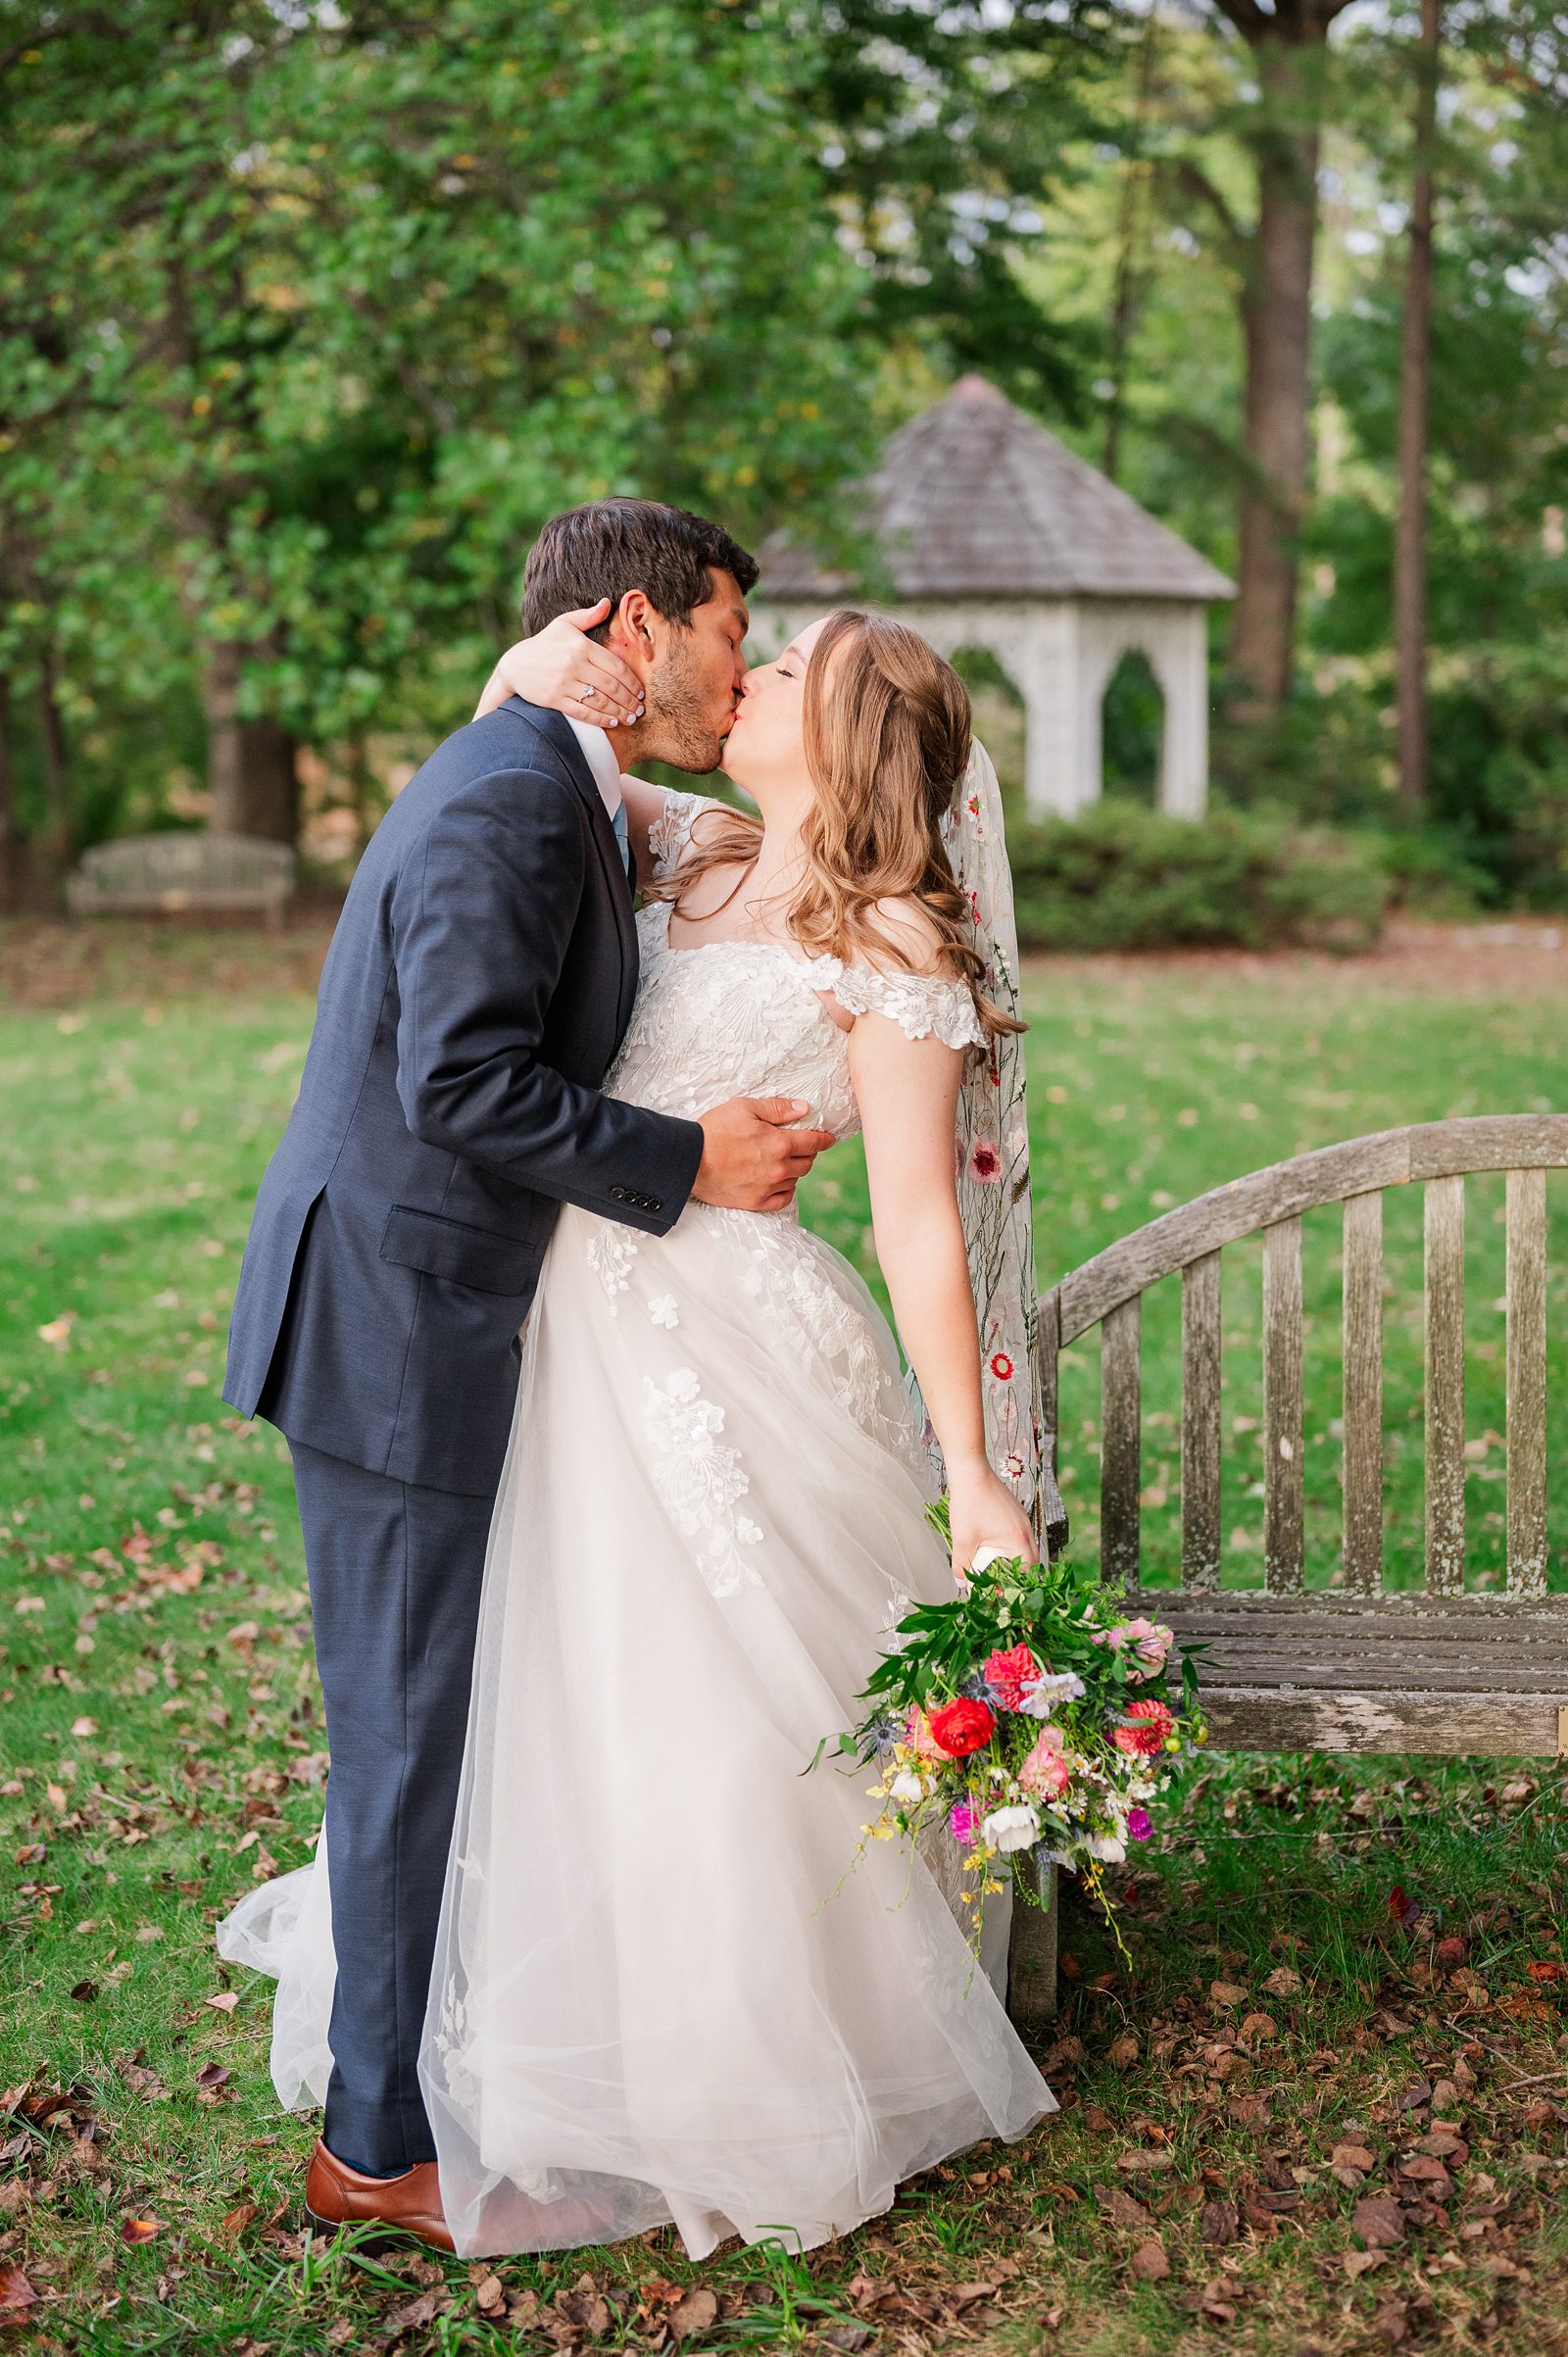 Bride and Groom Portraits at Fall Lewis Ginter Wedding in Rose Garden